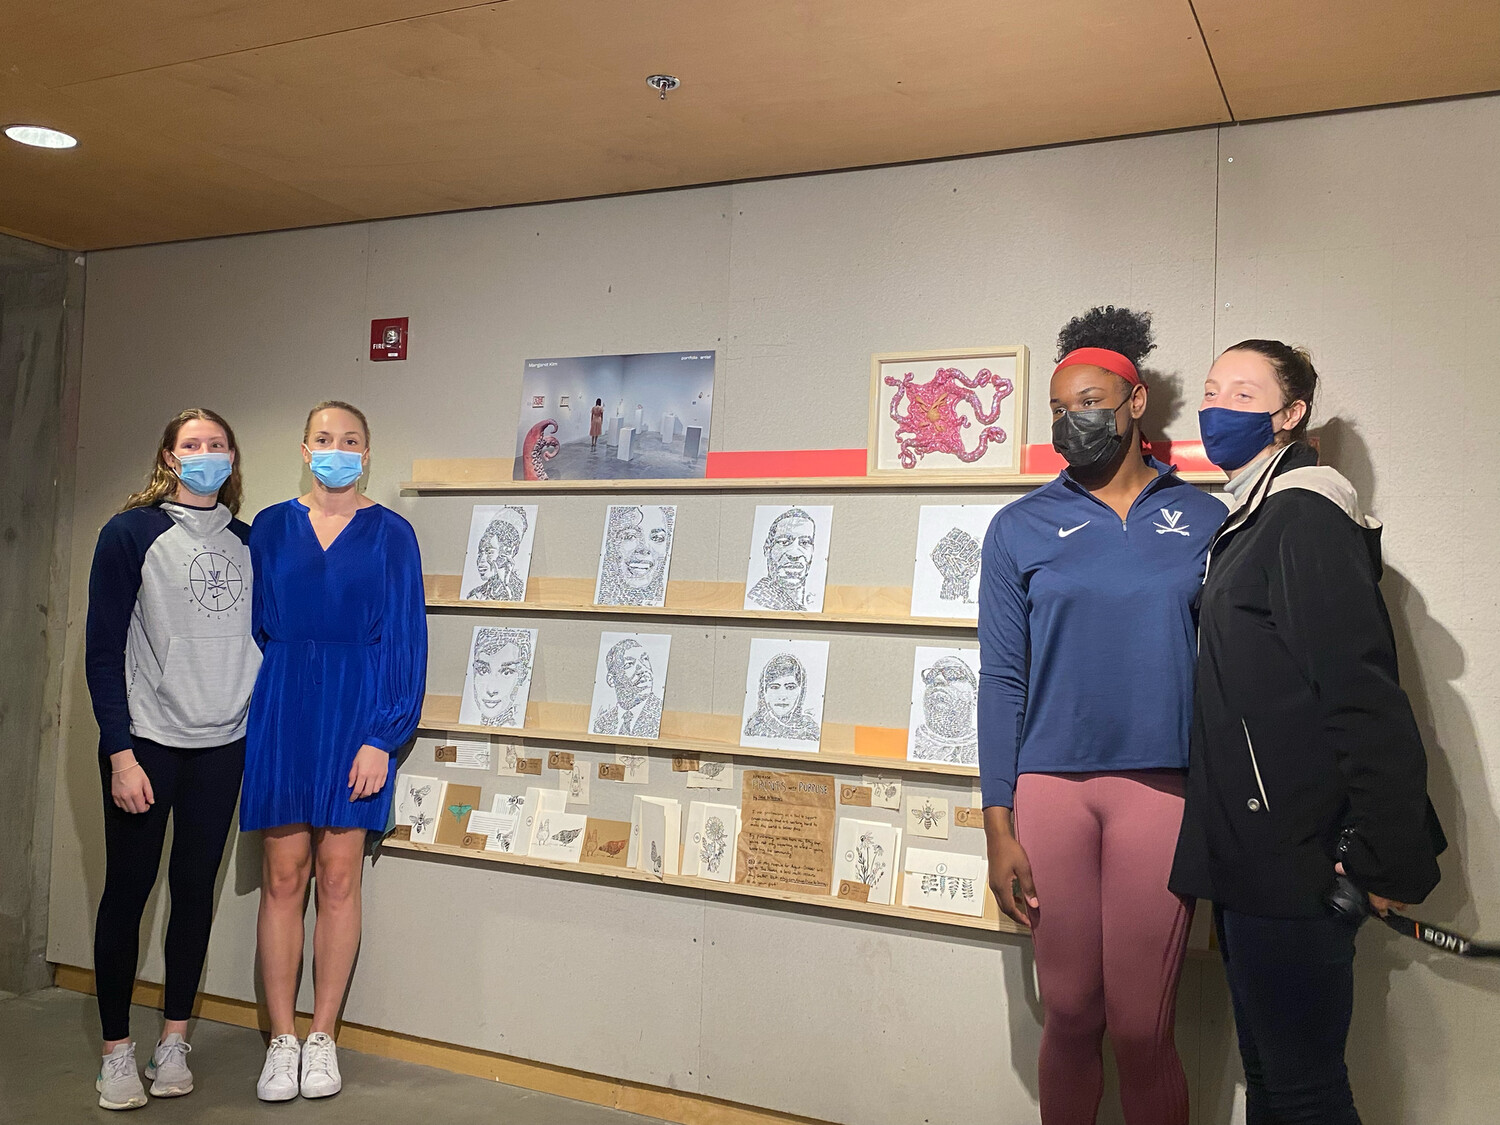 The UVA student arts fund exhibition, featuring numerous student art pieces funded by the Student Council Arts Fund initiative.